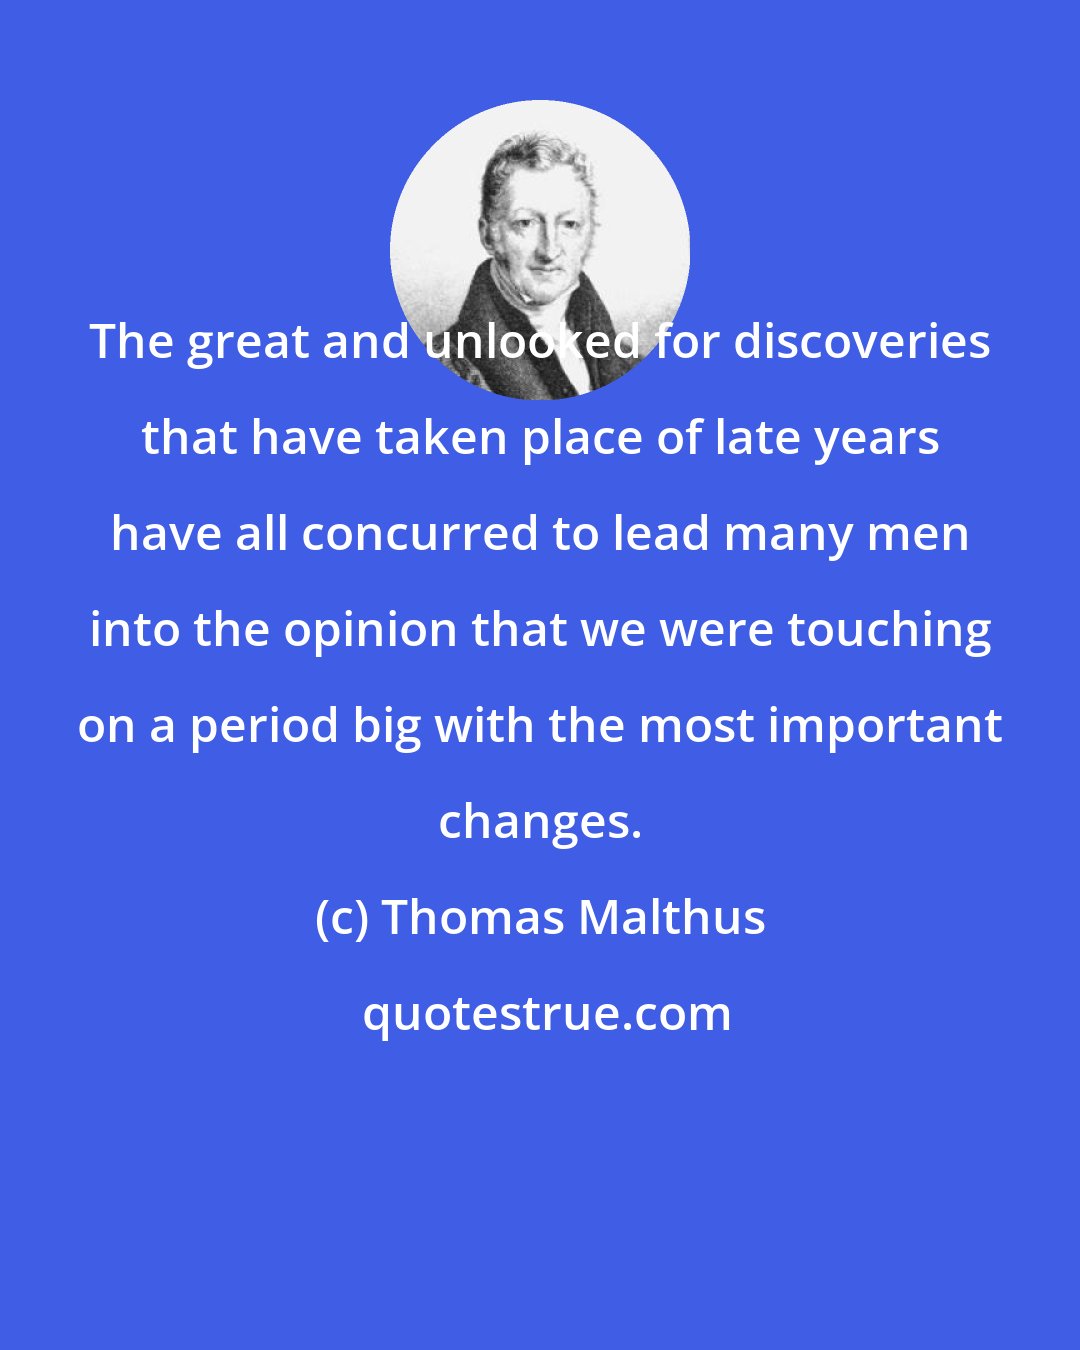 Thomas Malthus: The great and unlooked for discoveries that have taken place of late years have all concurred to lead many men into the opinion that we were touching on a period big with the most important changes.